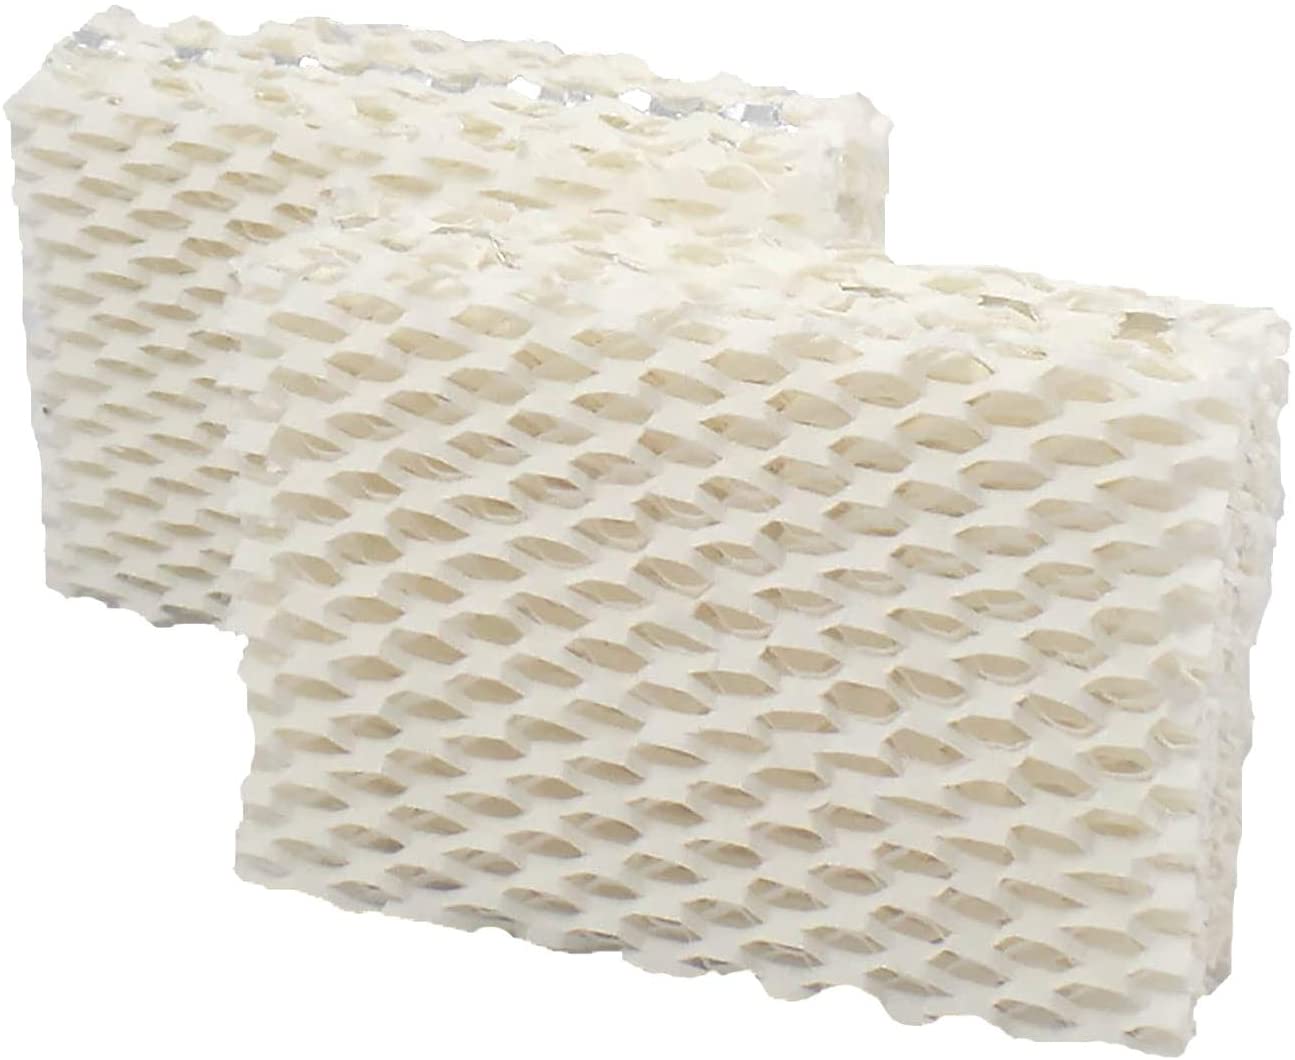 ‎Air Filter Factory Aluminum Reinforced ReliOn Compatible Humidifier Filters, 2-Pack